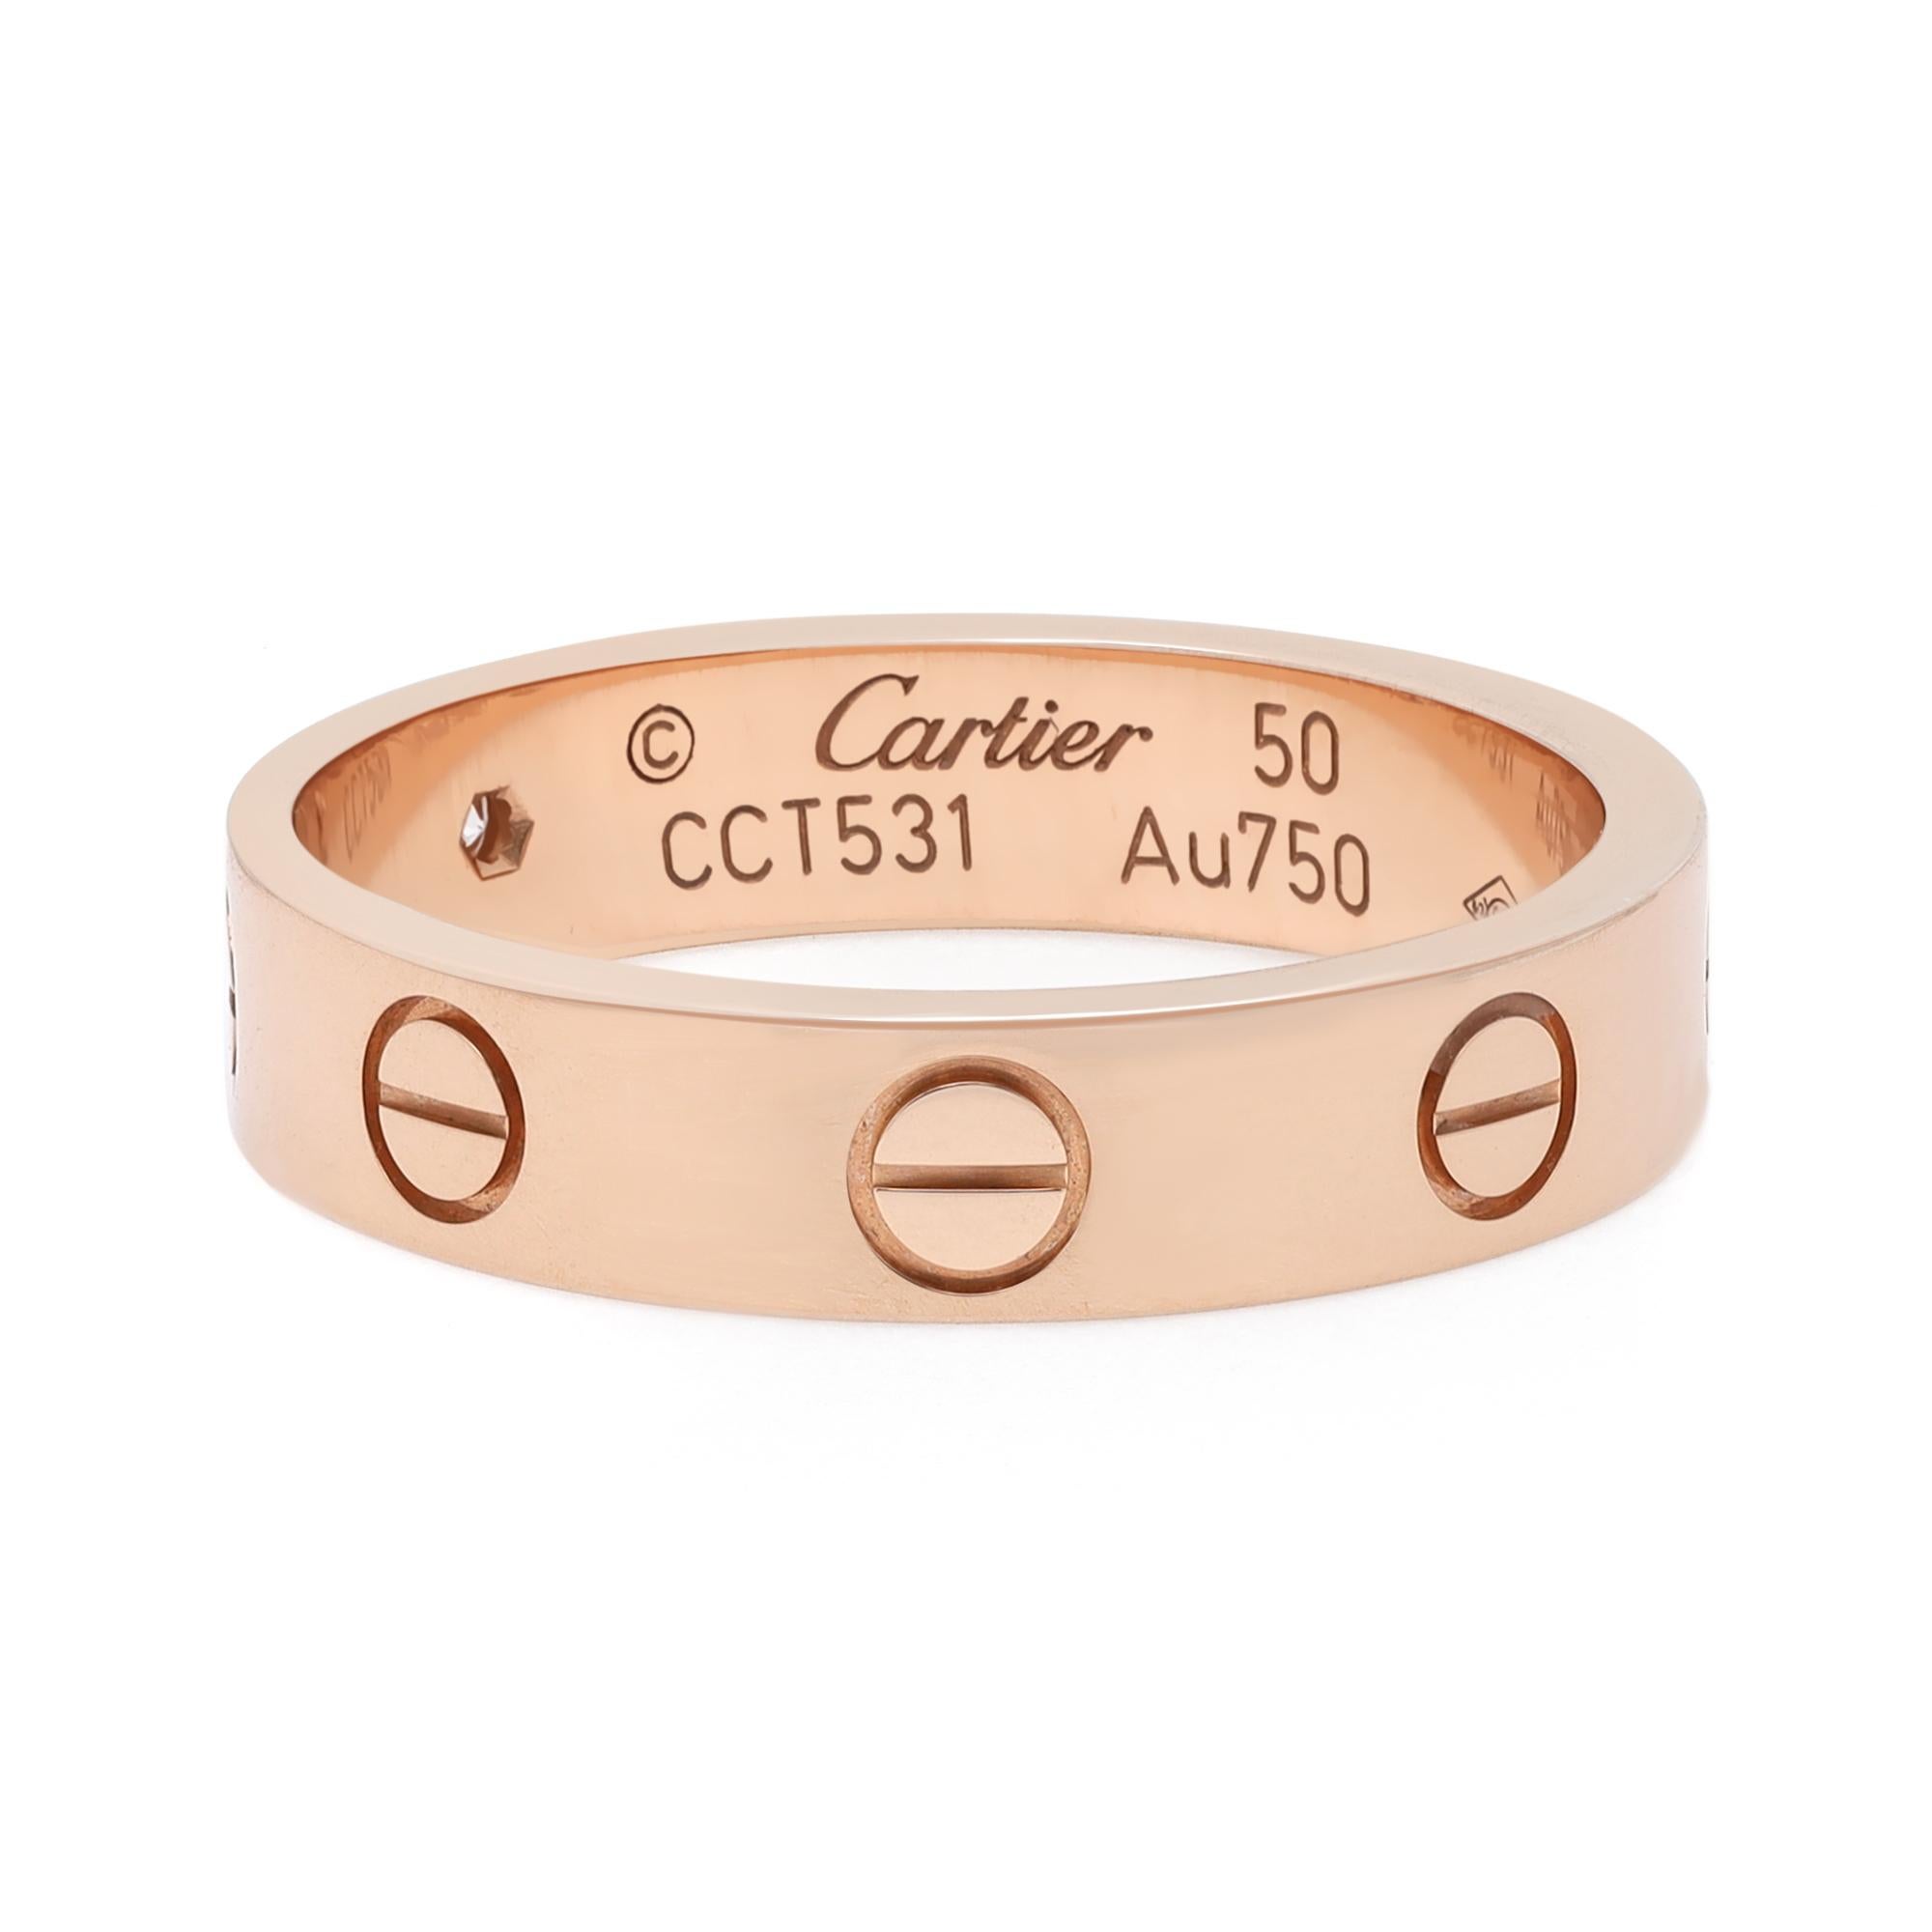 Cartier LOVE mini diamond wedding band ring. Crafted in 18k rose gold. This ring is set with 1 round brilliant cut diamond weighing 0.02 carat. Ring size: 5.5. Width: 4 mm. Excellent pre-owned condition. Comes with an original box. 